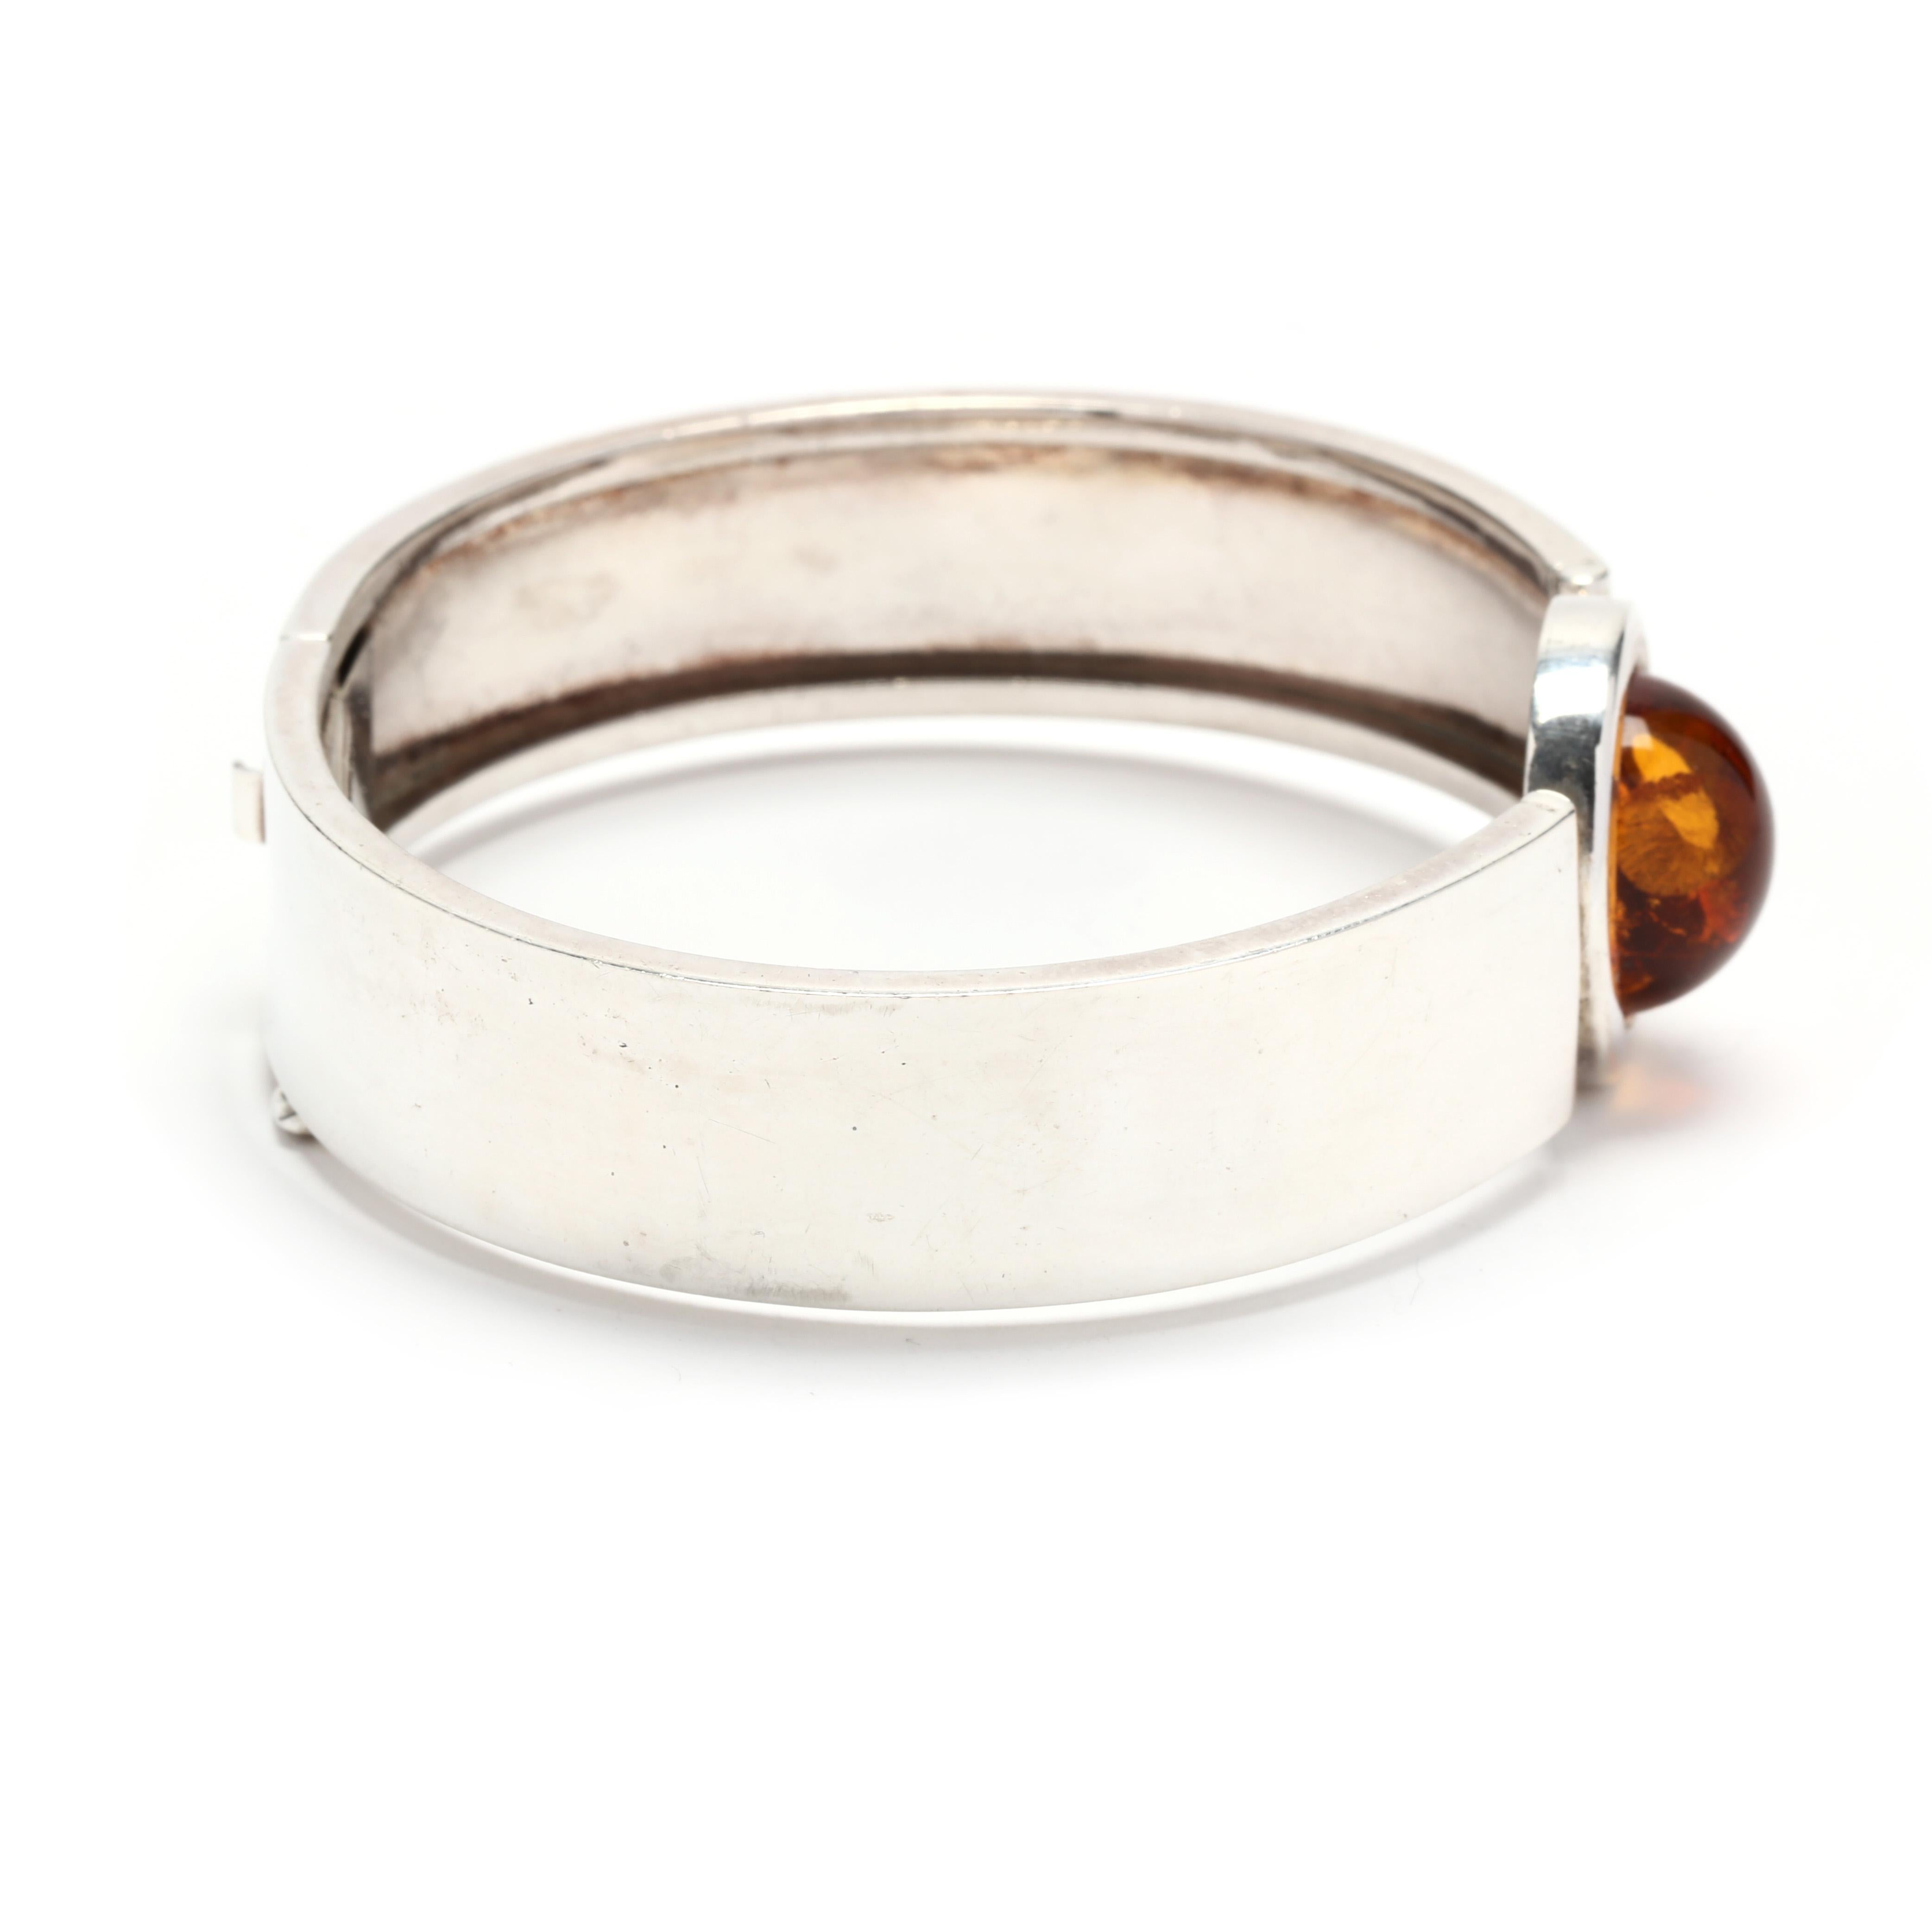 A vintage sterling silver round cabochon amber bangle bracelet. This stackable bracelet featuring a central bezel set oval cabochon amber joined to a flat silver bracelet with an integrated clasp and safety catch.  It is stamped 925.

Stones:
-